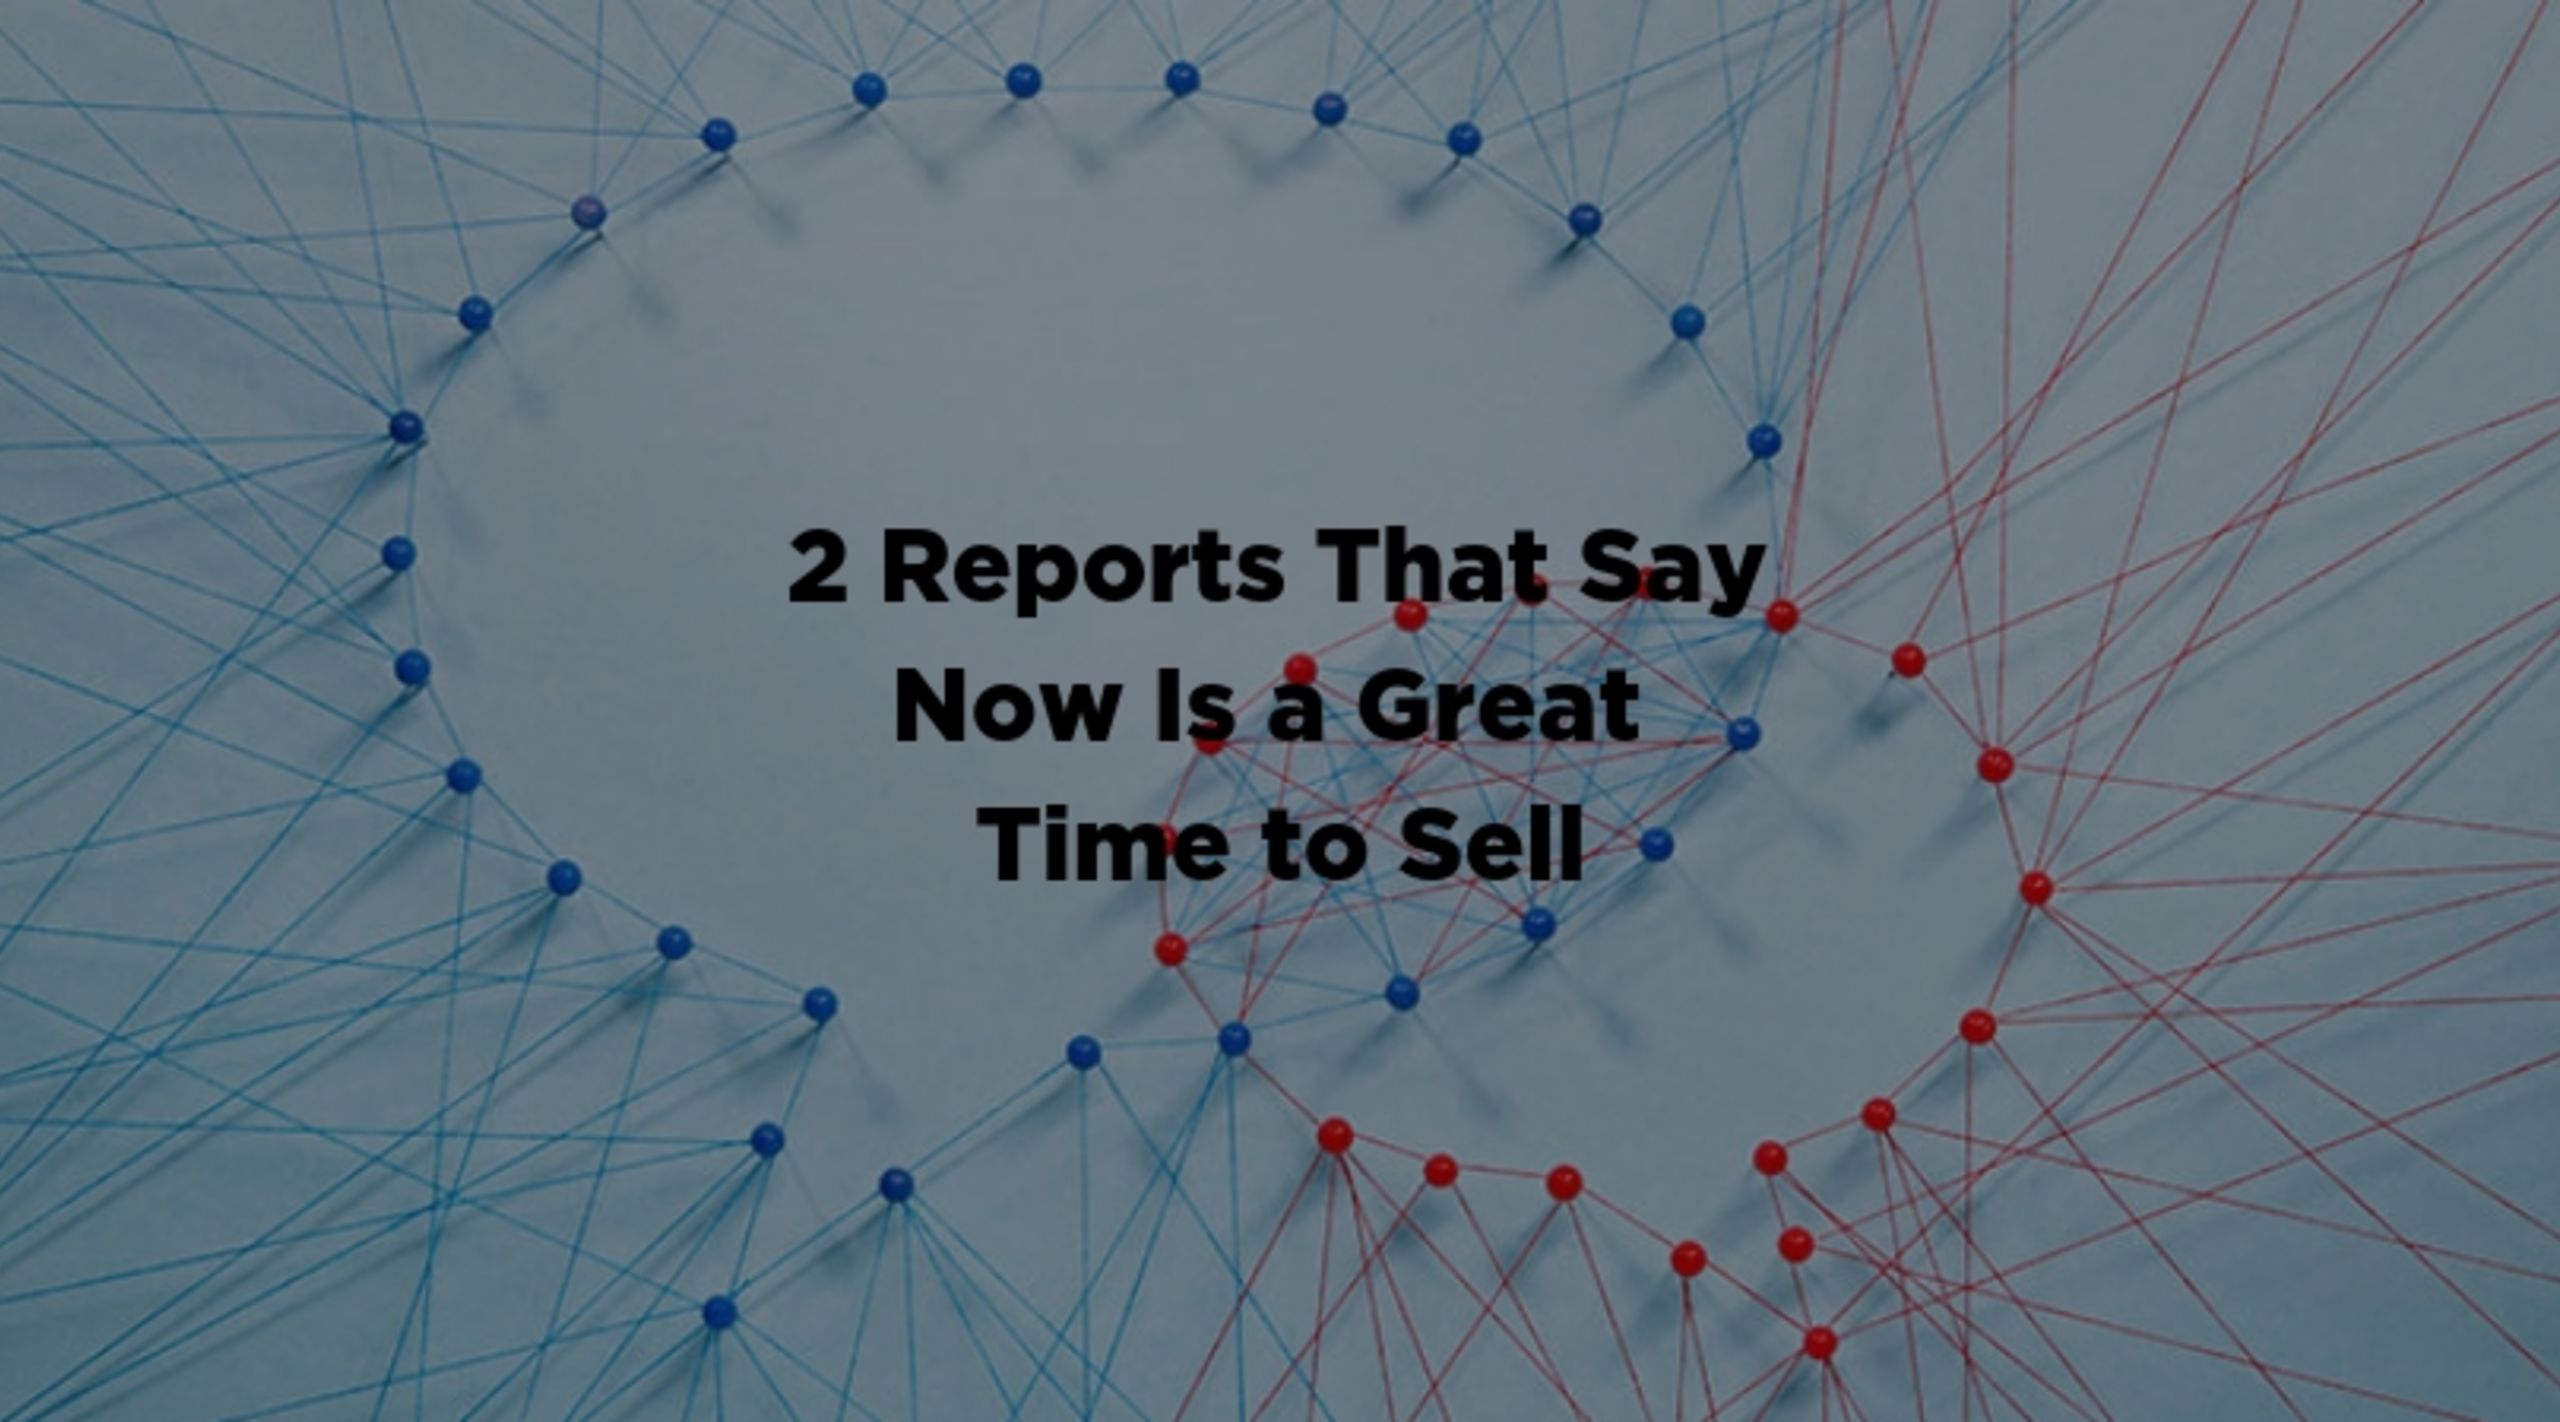 2 Reports That Say Now Is a Great Time to Sell